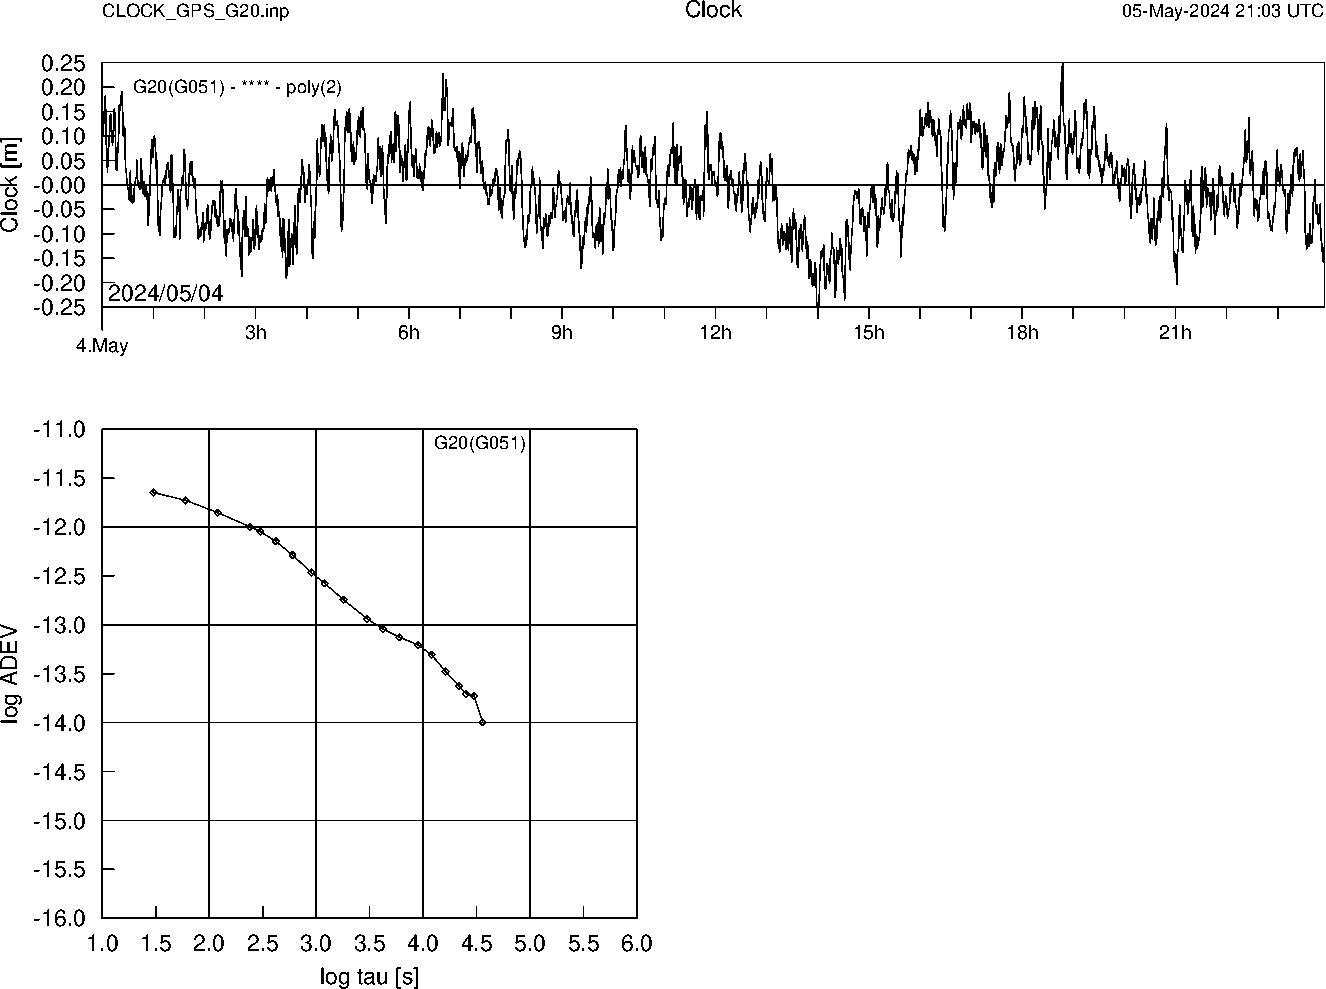 GPS G20 Clock Time Series and Allan Deviation